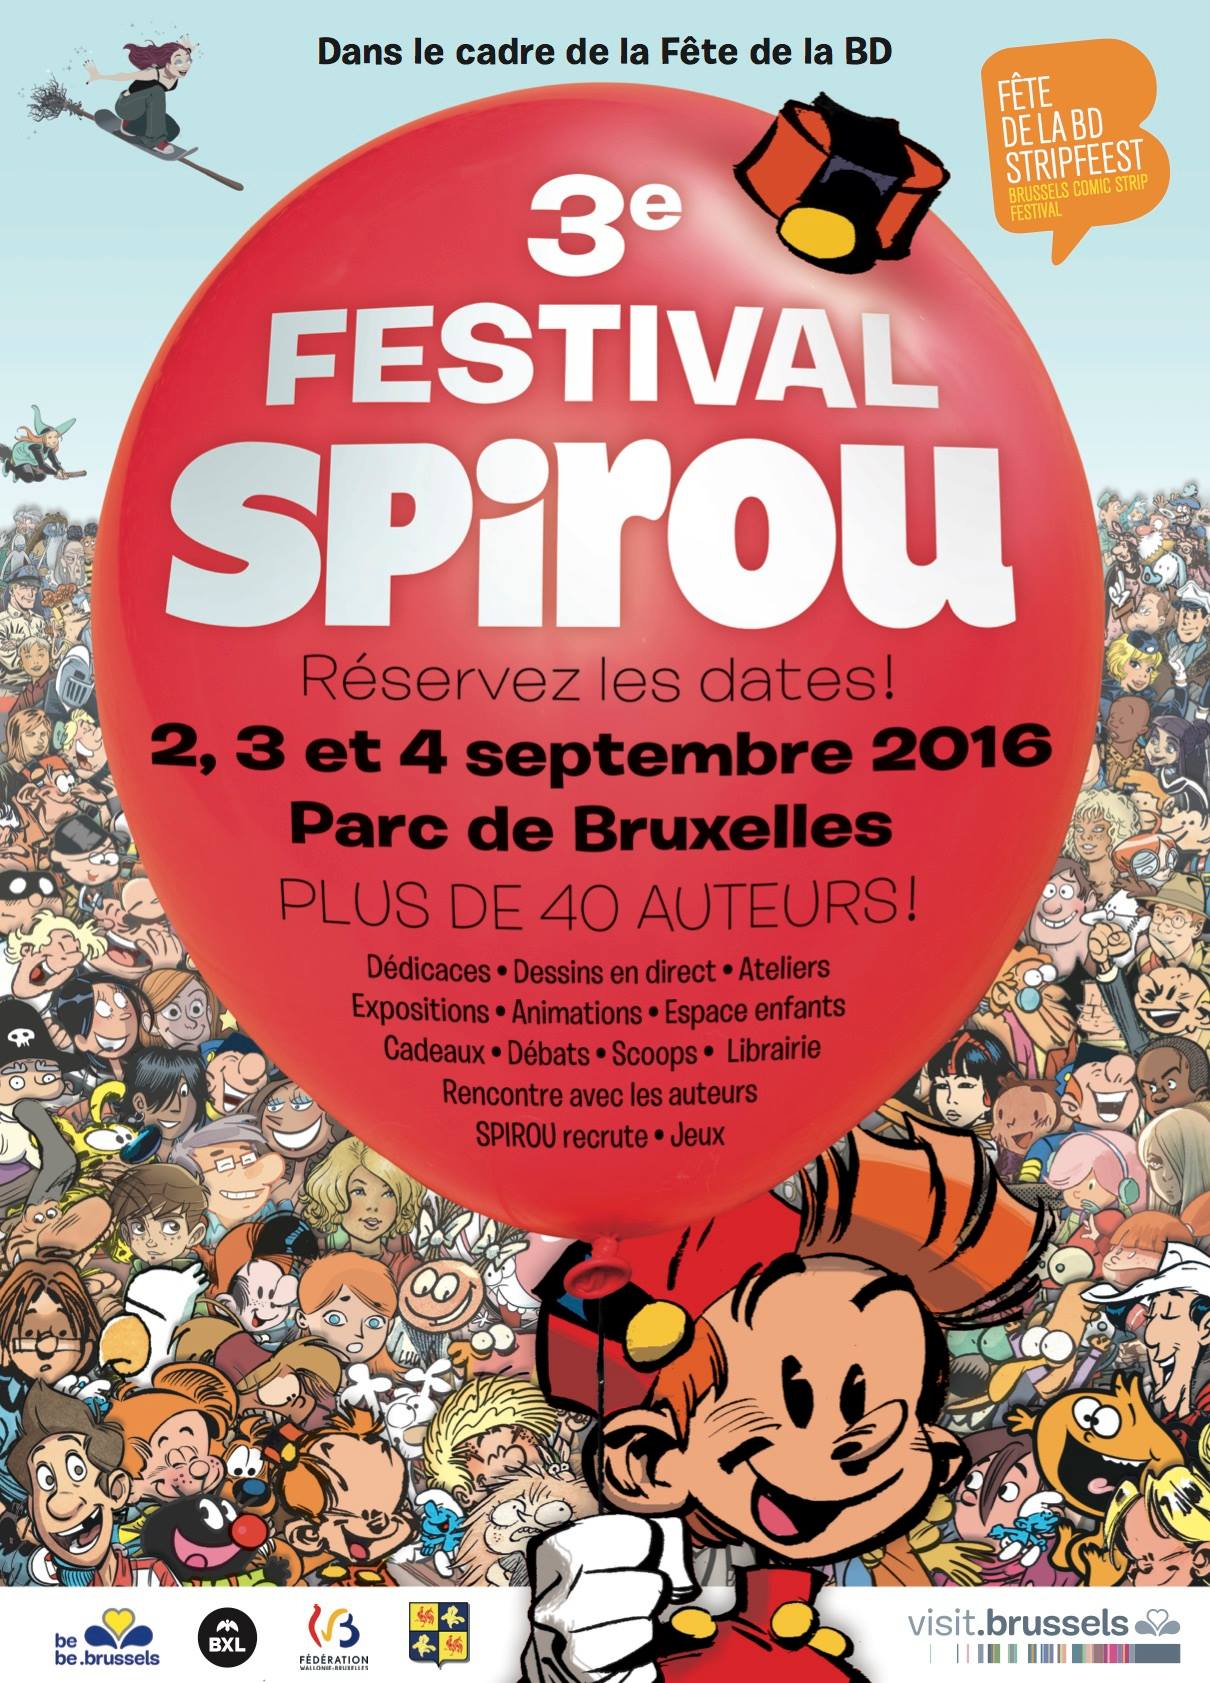 Festival Spirou 2016 poster (ill. Yoann et al.; Copyright (c) Dupuis and the artists; image from facebook.com)